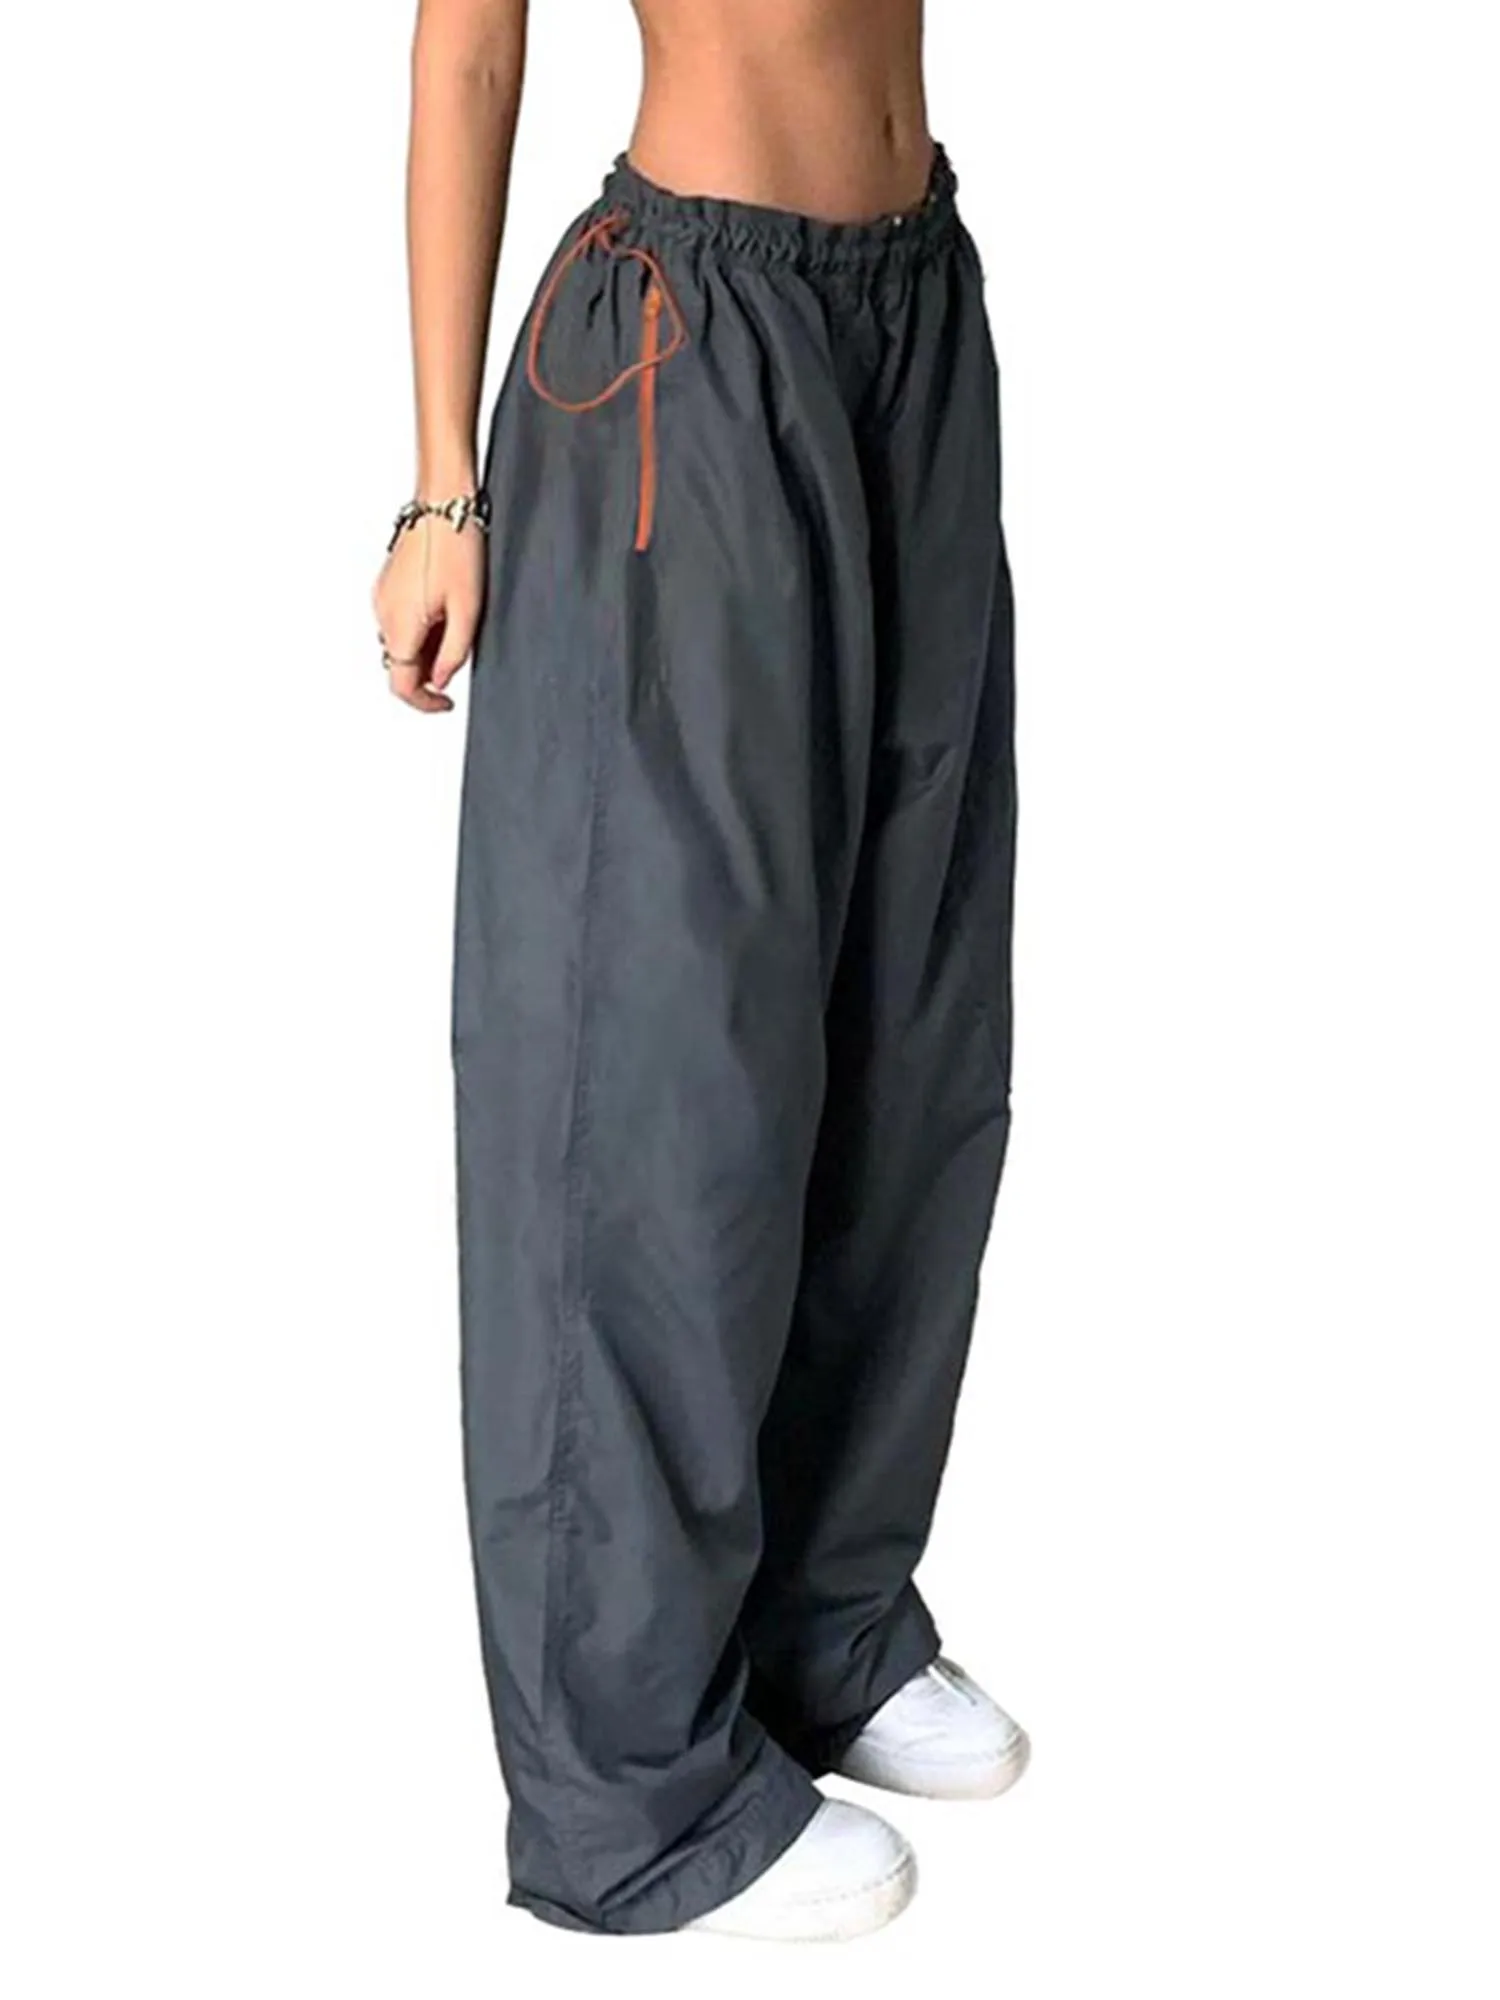 Loose Fit Cargo Sweatpants for Women with Drawstring Elastic Waist and Wide Leg Jogger Trousers - Perfect for Casual Hip Hop